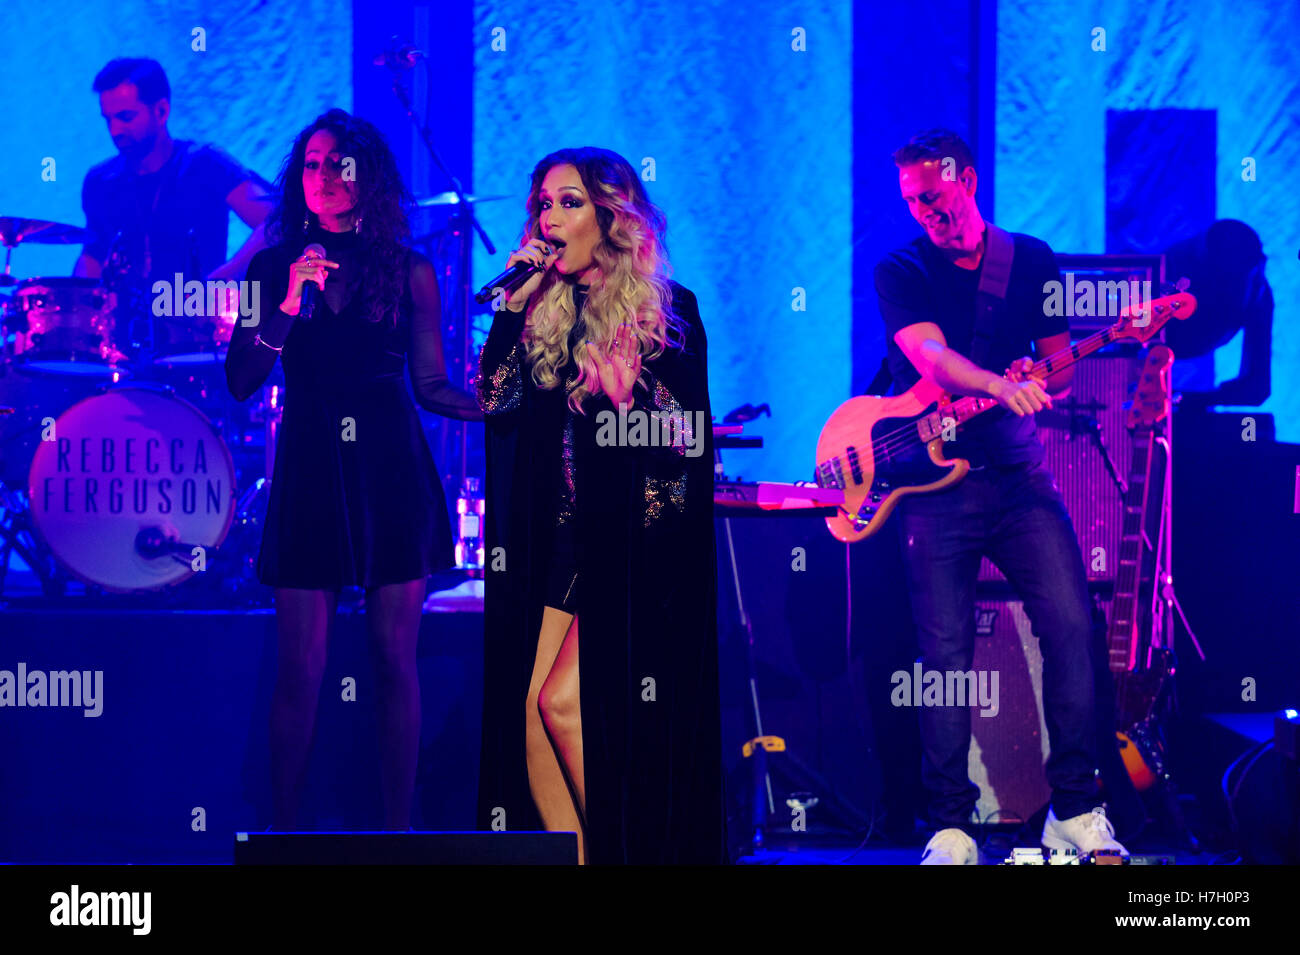 Liverpool, UK. 4th November 2016. Singer and former X Factor runner up, Rebecca Ferguson, performs her homecoming show, to a sellout audience, at the Liverpool Philharmonic Hall as part of her UK 'Superwoman' tour. © Paul Warburton Stock Photo